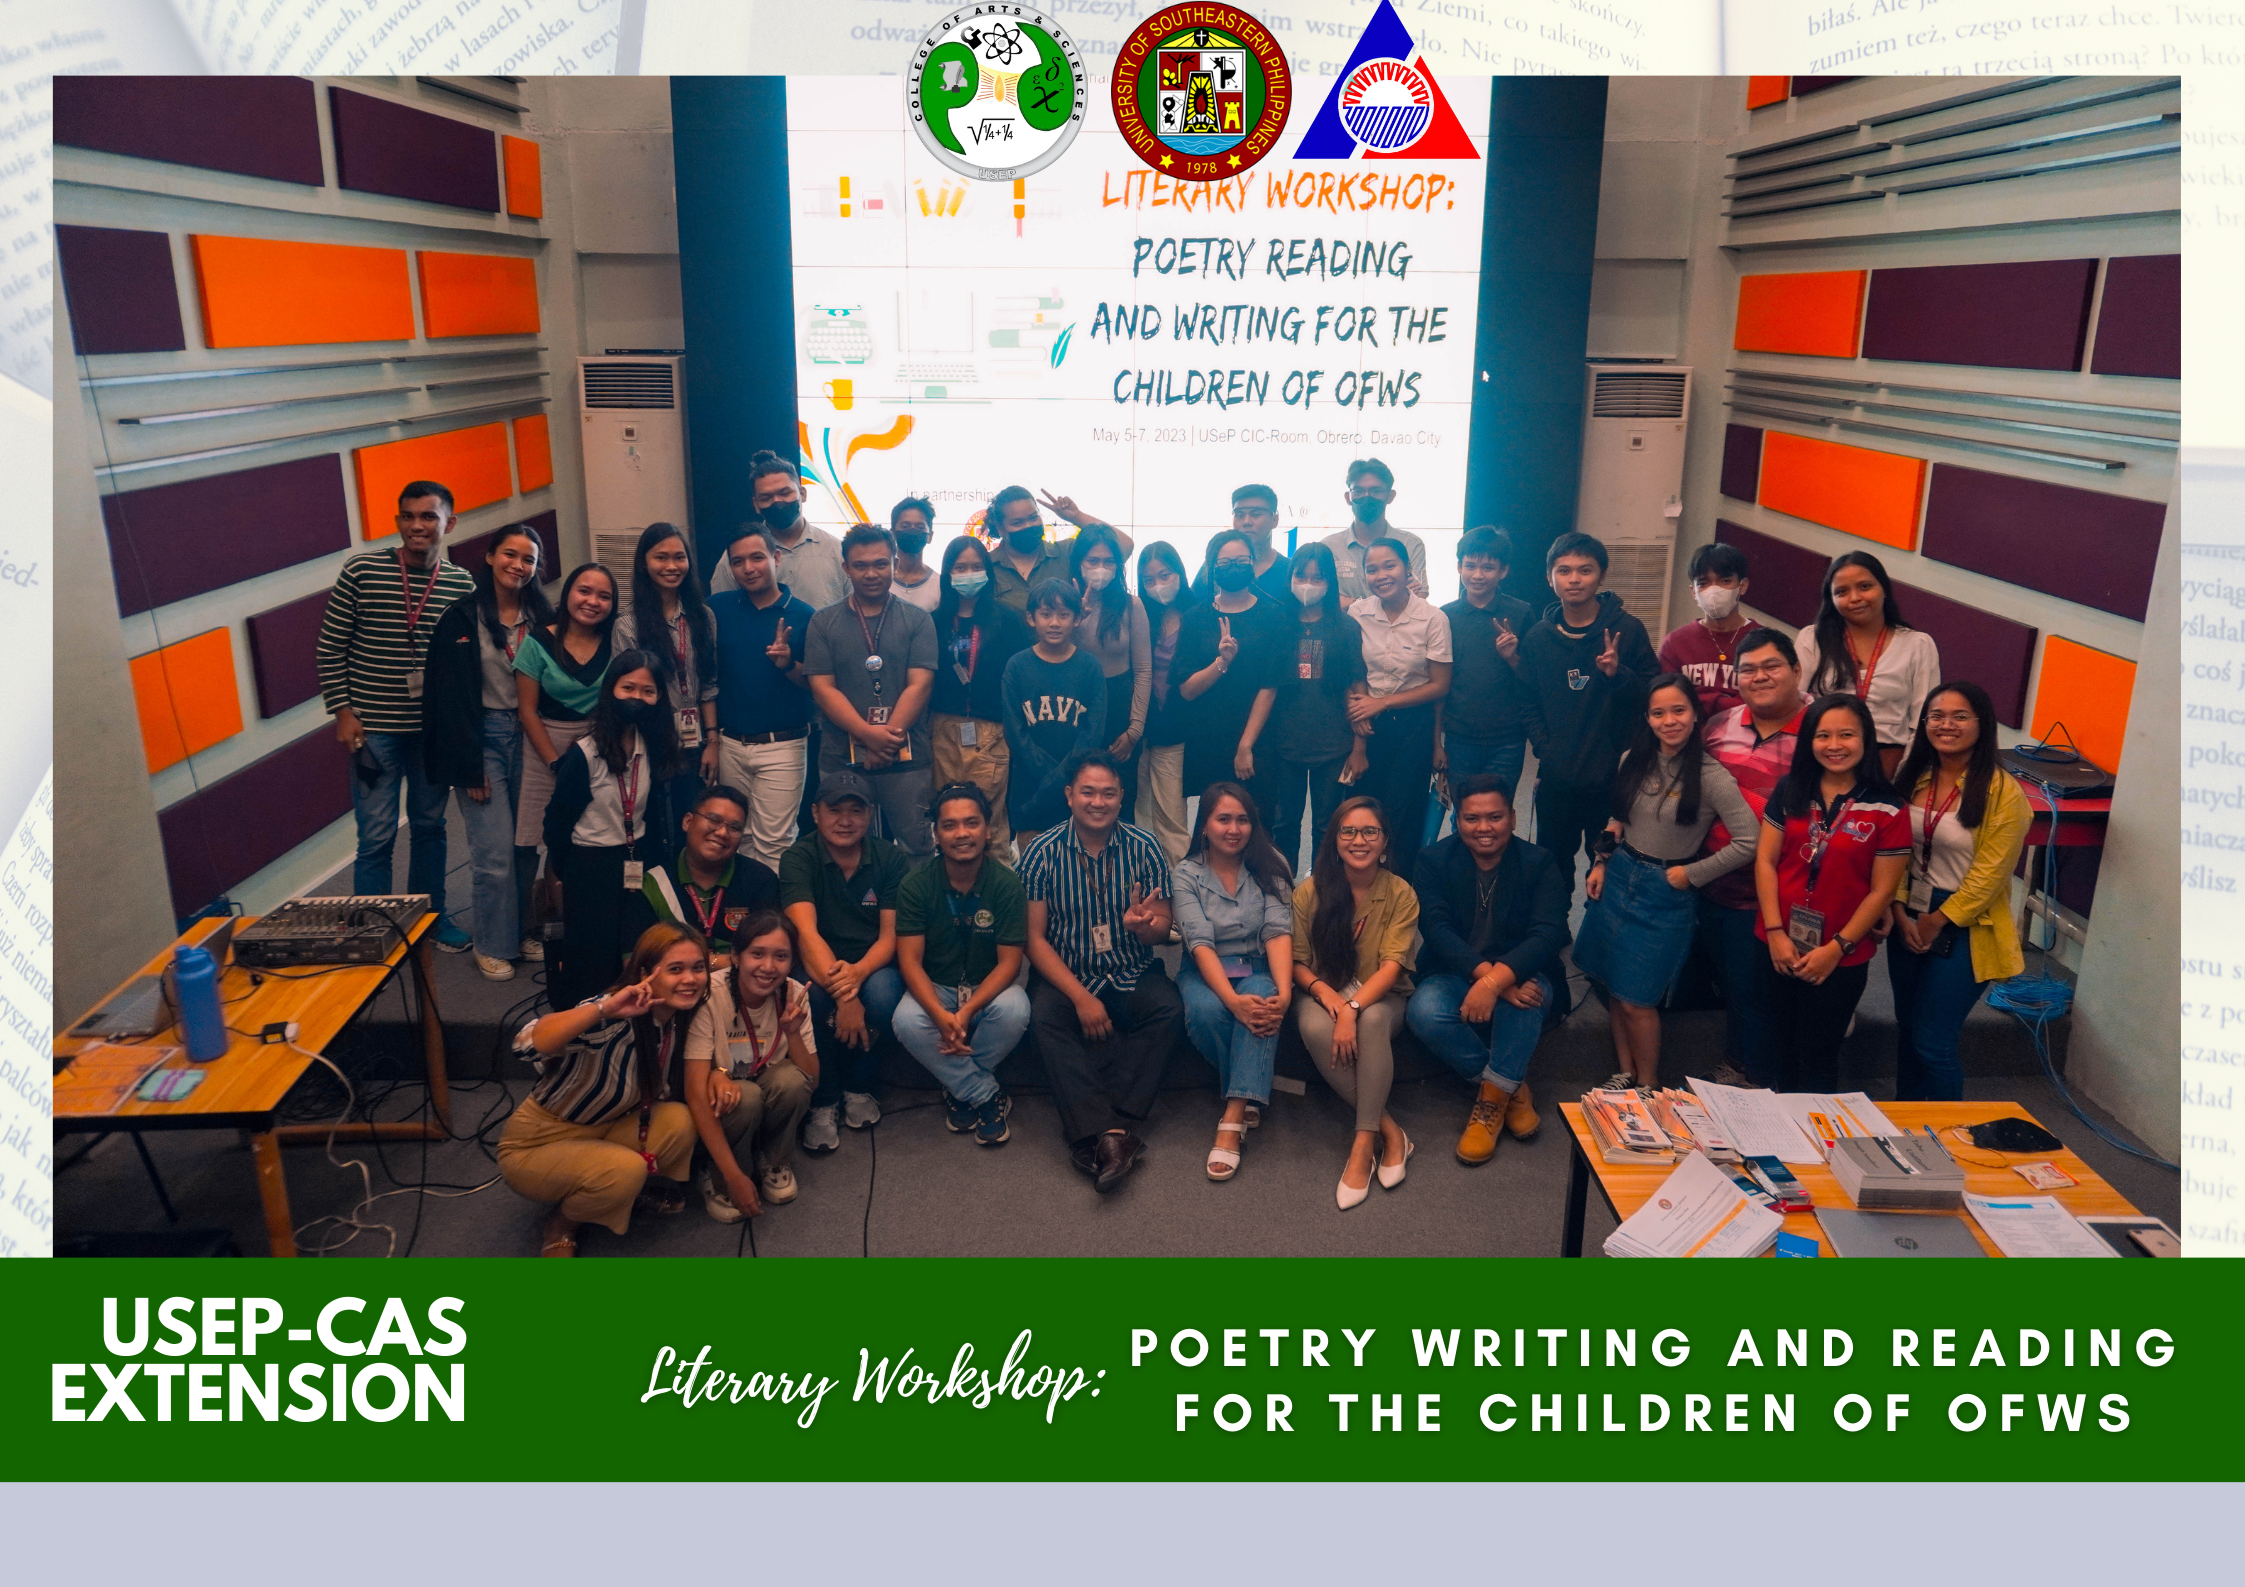 CAS Extension Unit Partners with OWWA RWO XI through “Literary Workshop: Poetry Writing and Reading for the Children of OFW”